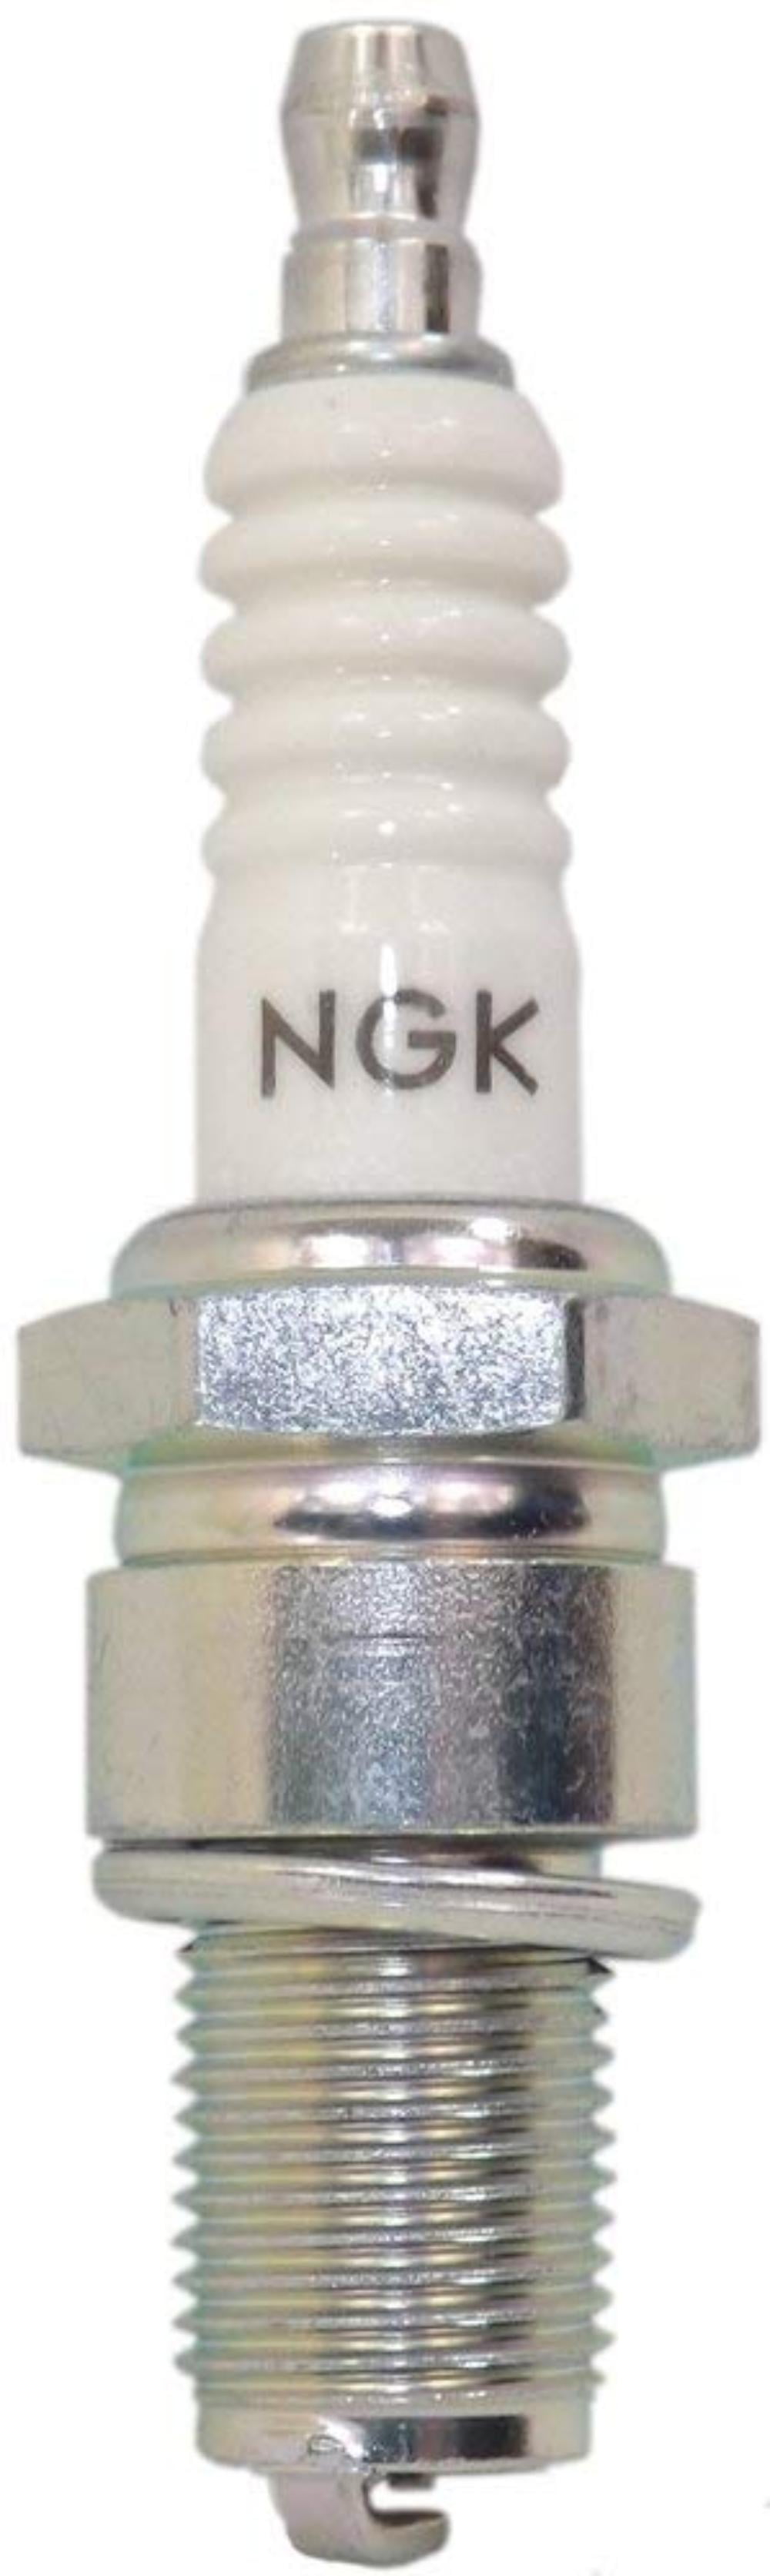 NGK Spark Plug Single Piece Pack for Stock Number 2306 or Copper Core Part No CPR8EA-9